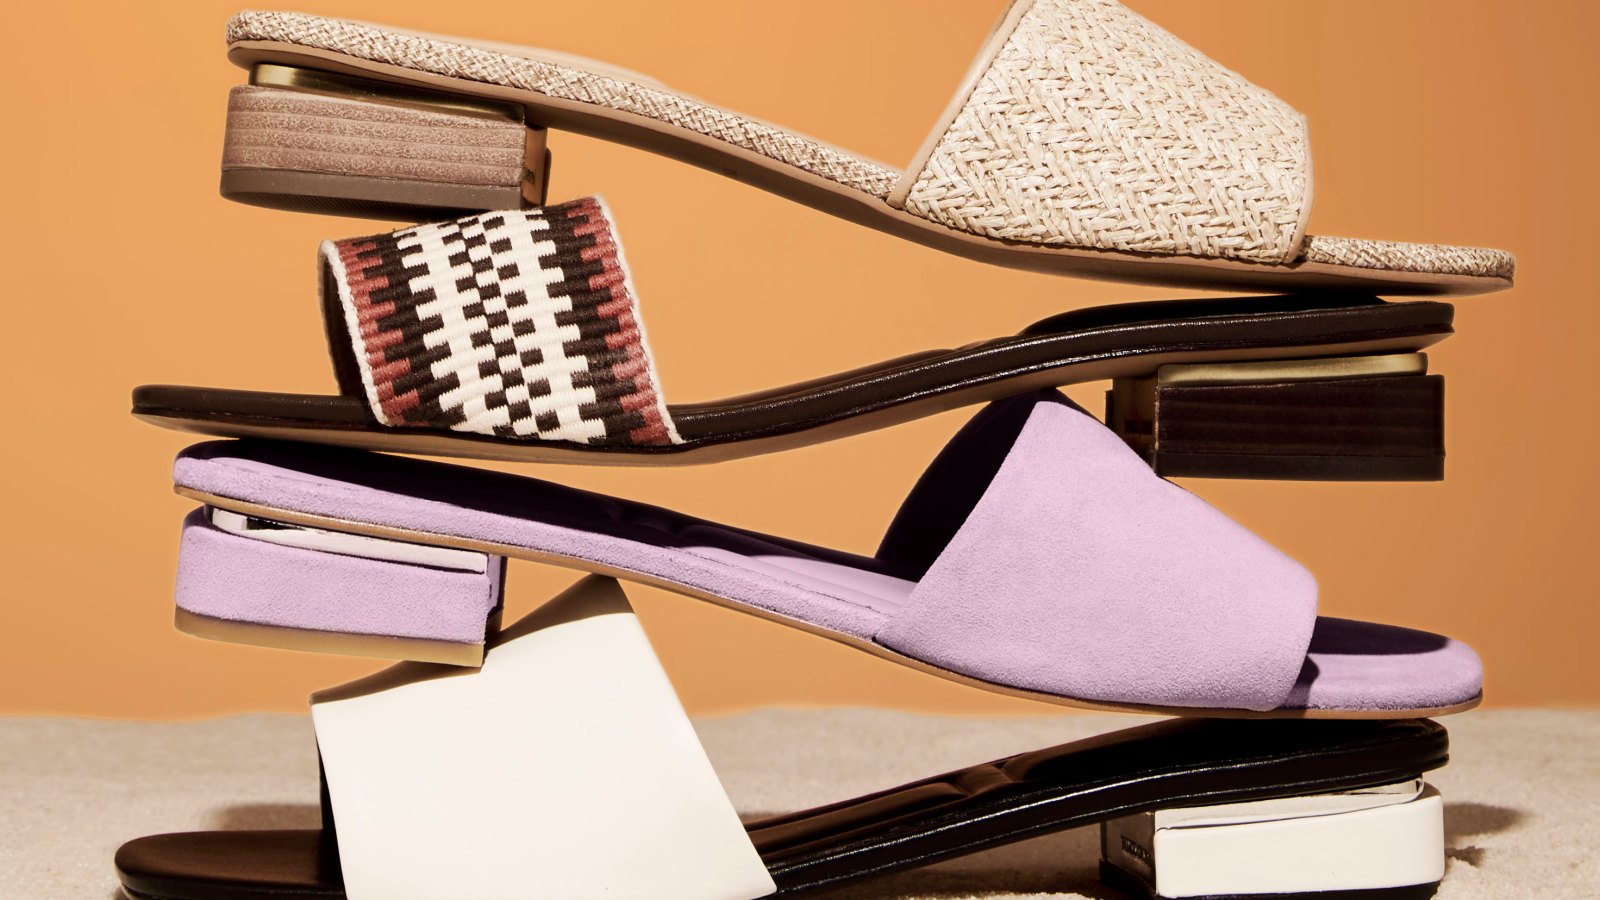 Is Camuto Group Getting Closer to Finding a New Owner?